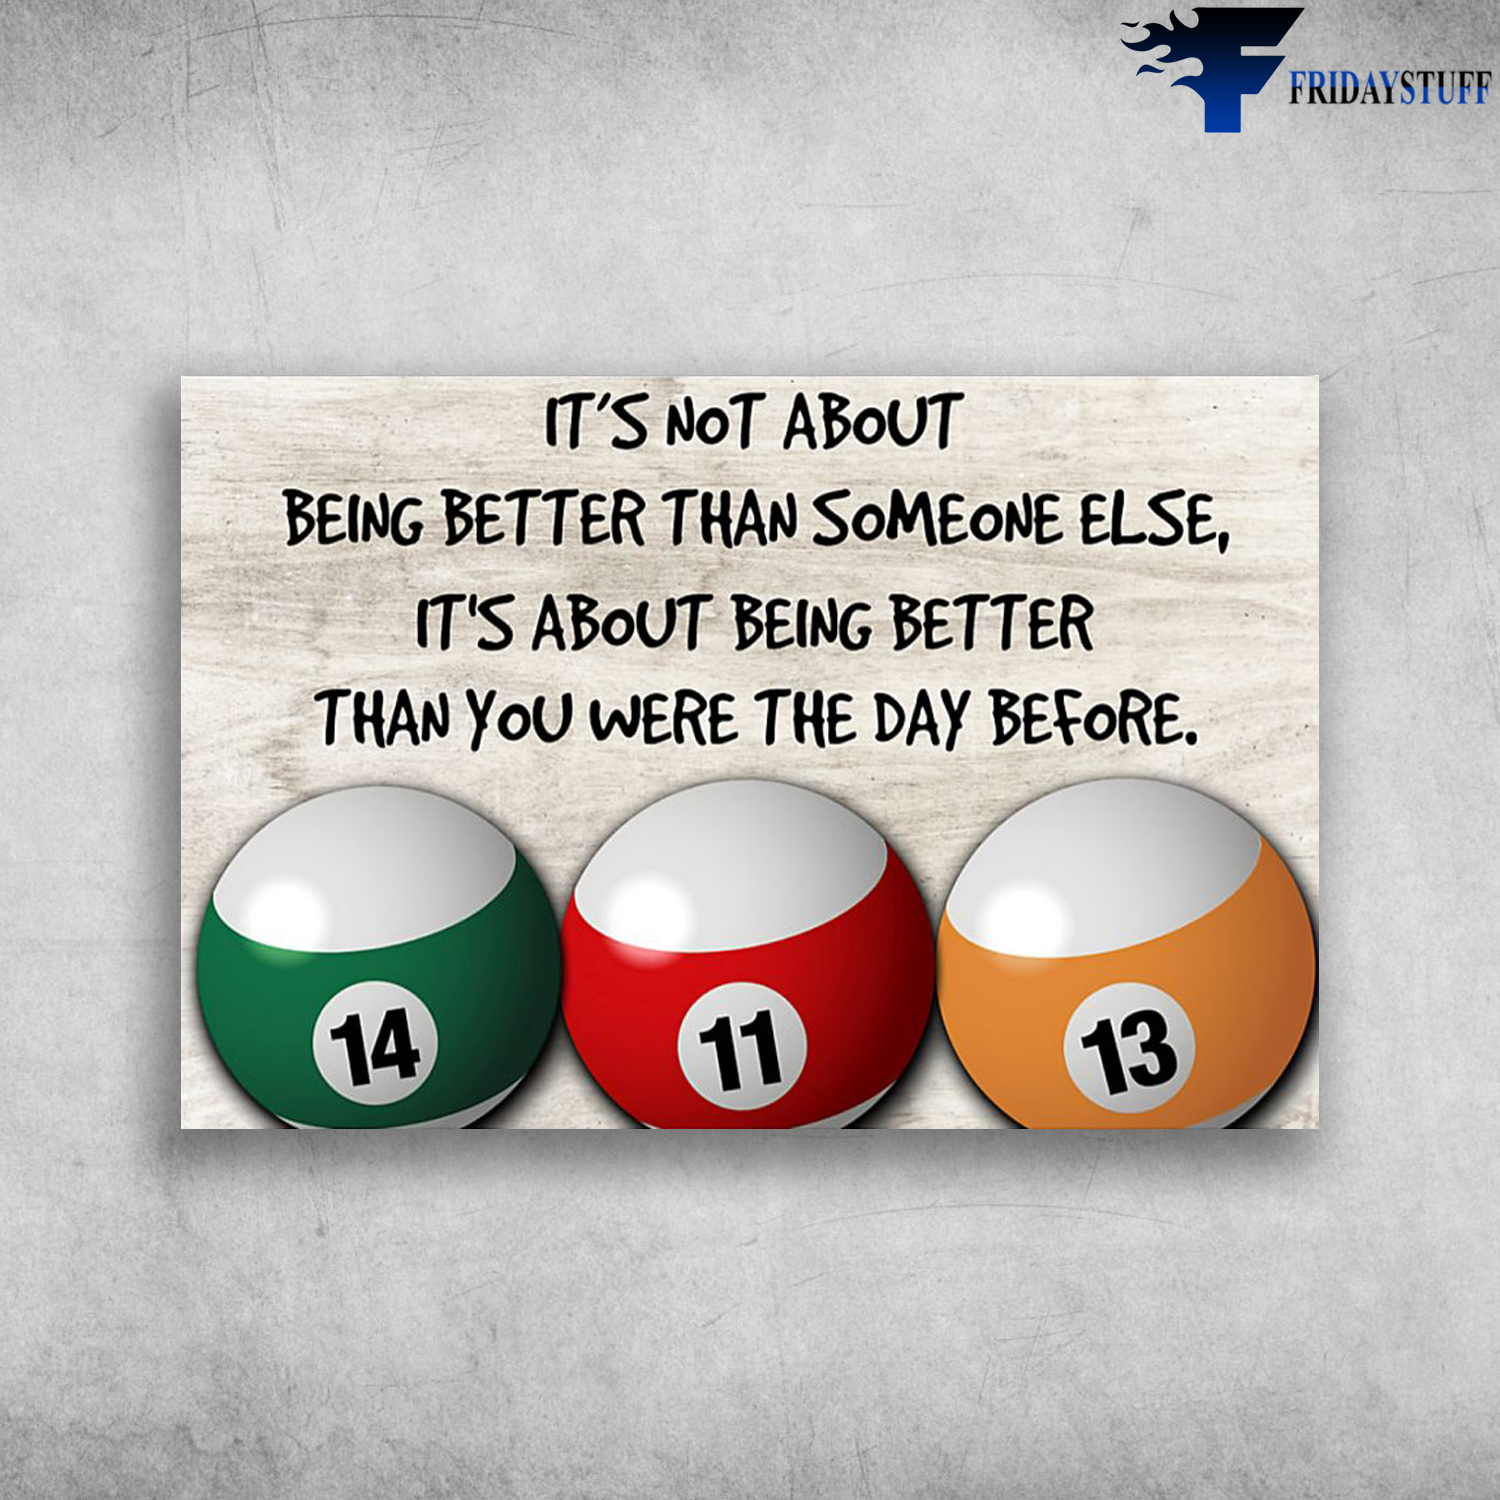 Billiard - It's Not About Being Better Than Someone Else, It's About Being Better Than You Were The Day Before